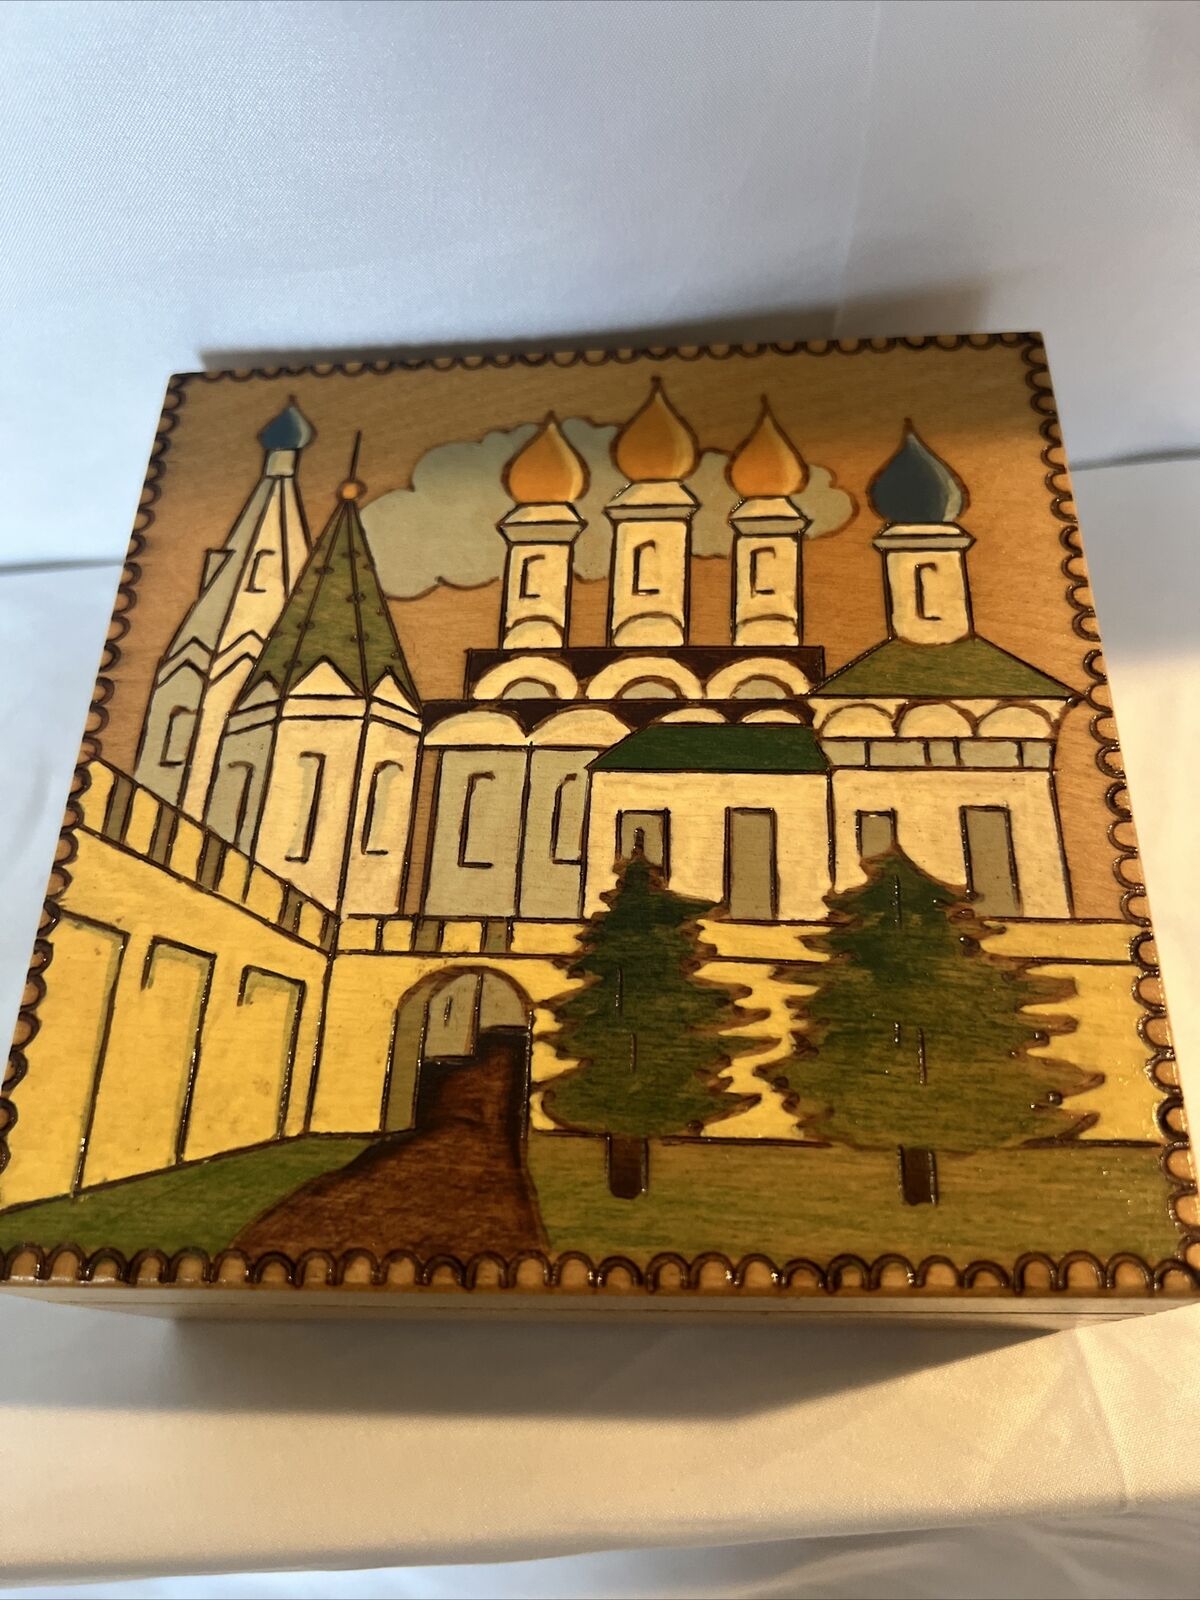 Vintage Handcrafted Wooden Trinket Box Scenery Architecture Jewelry Box 4”